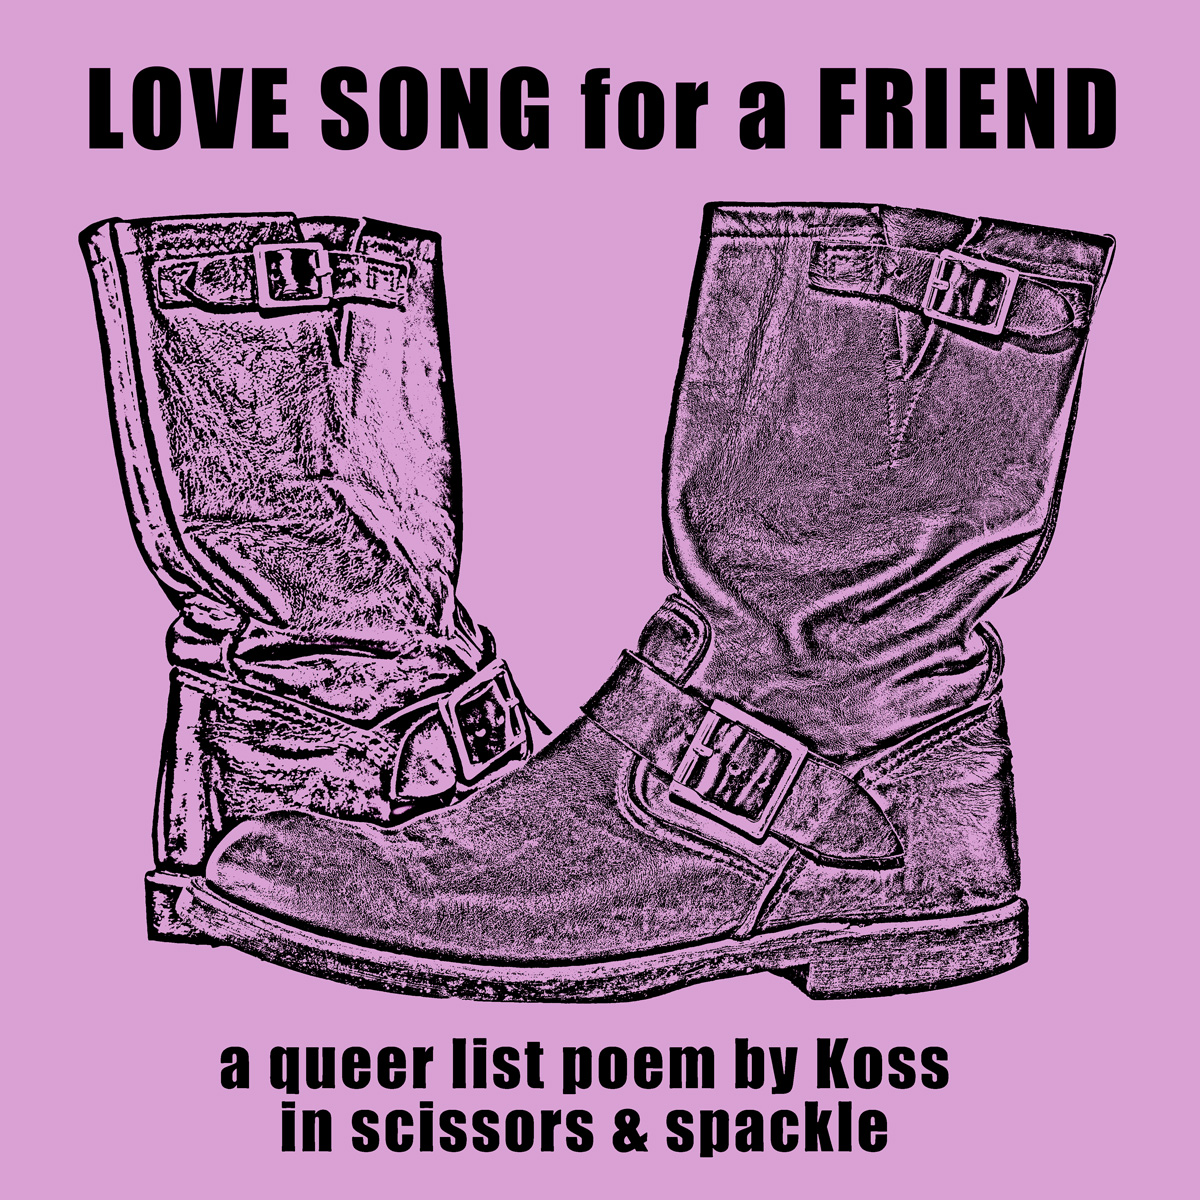 motorcycle boots on pink with poem title for "love song for a friend"